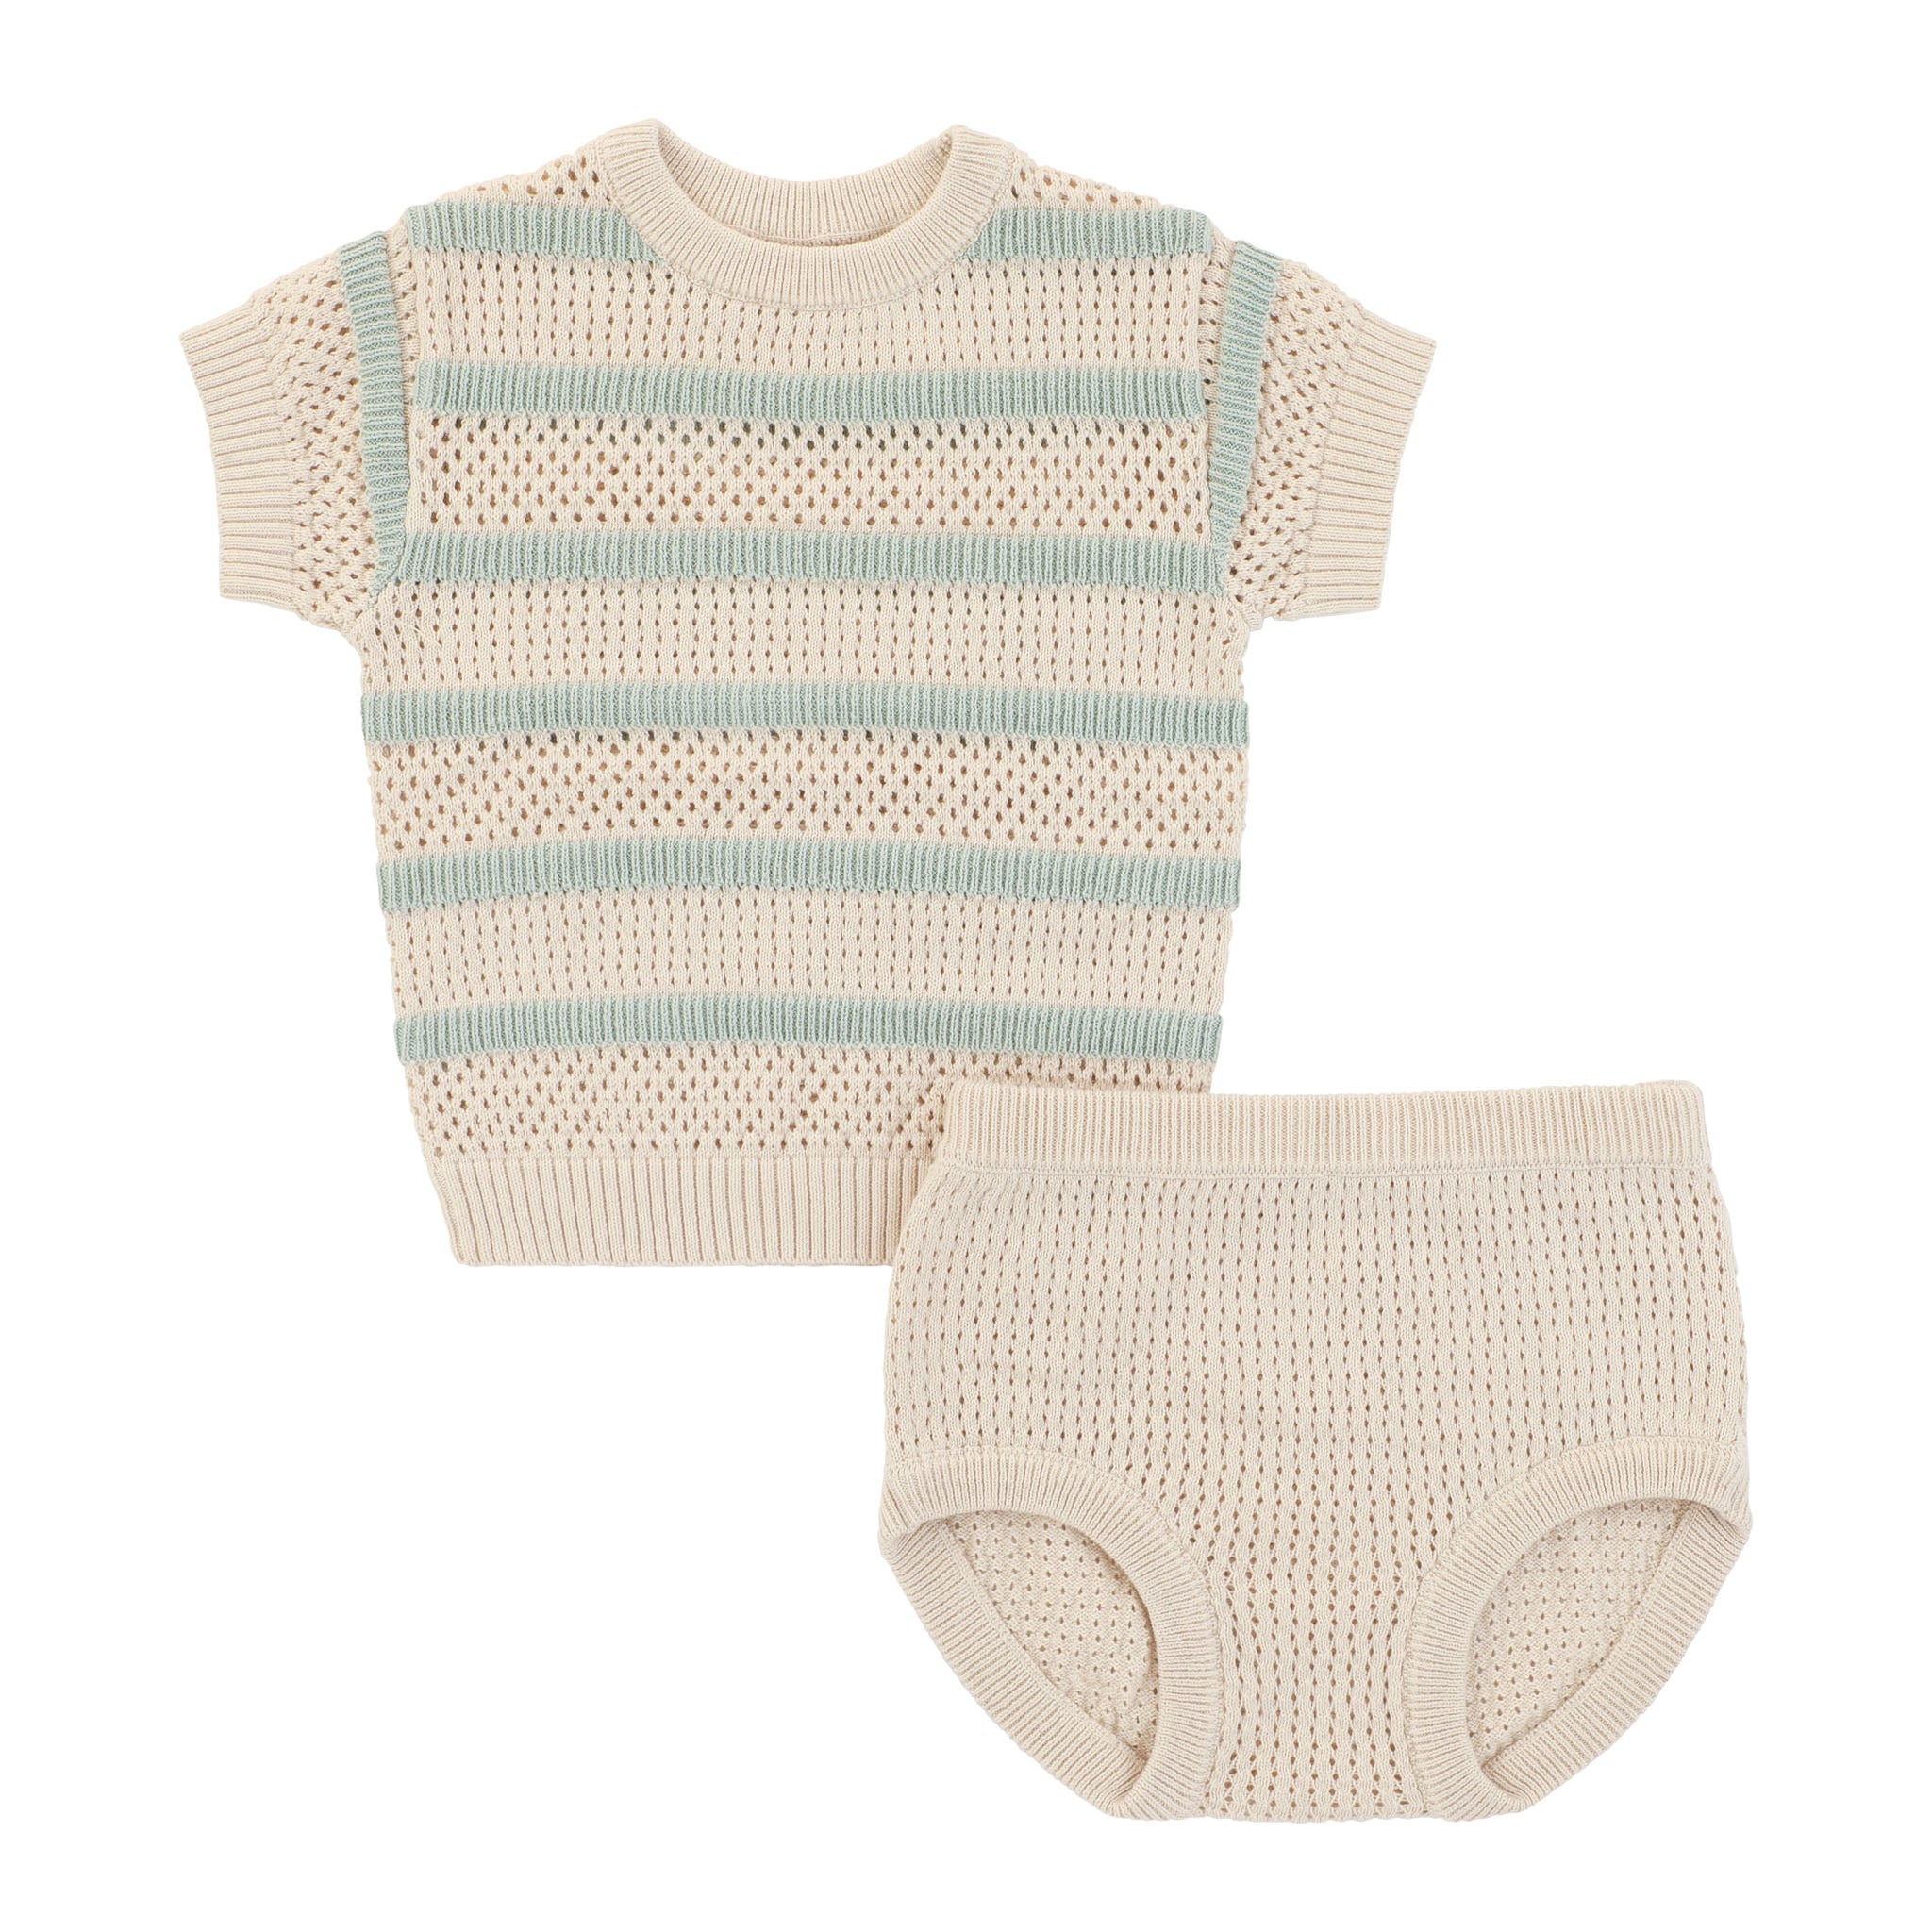 Green Pointelle Knit Striped Square Baby Set